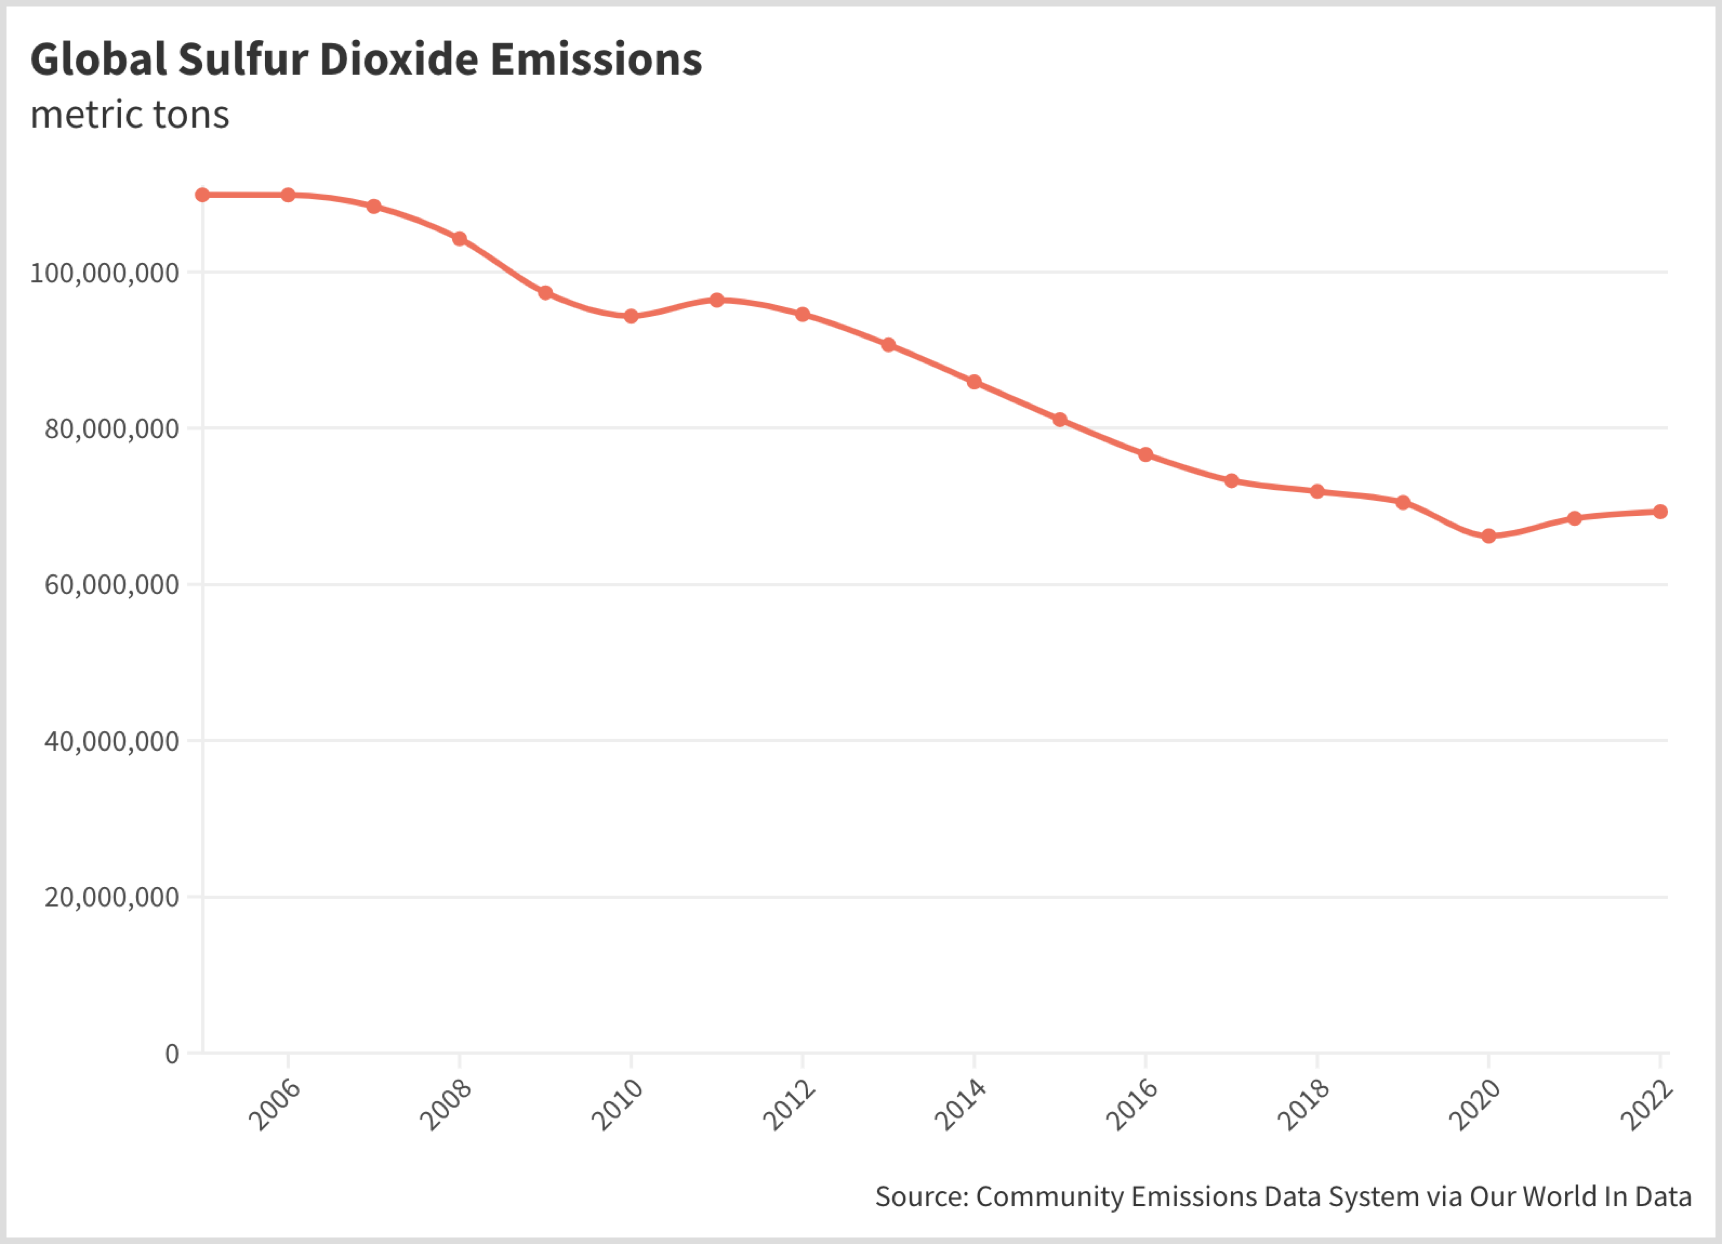 A line chart of global sulfur dioxide emissions in metric tons.